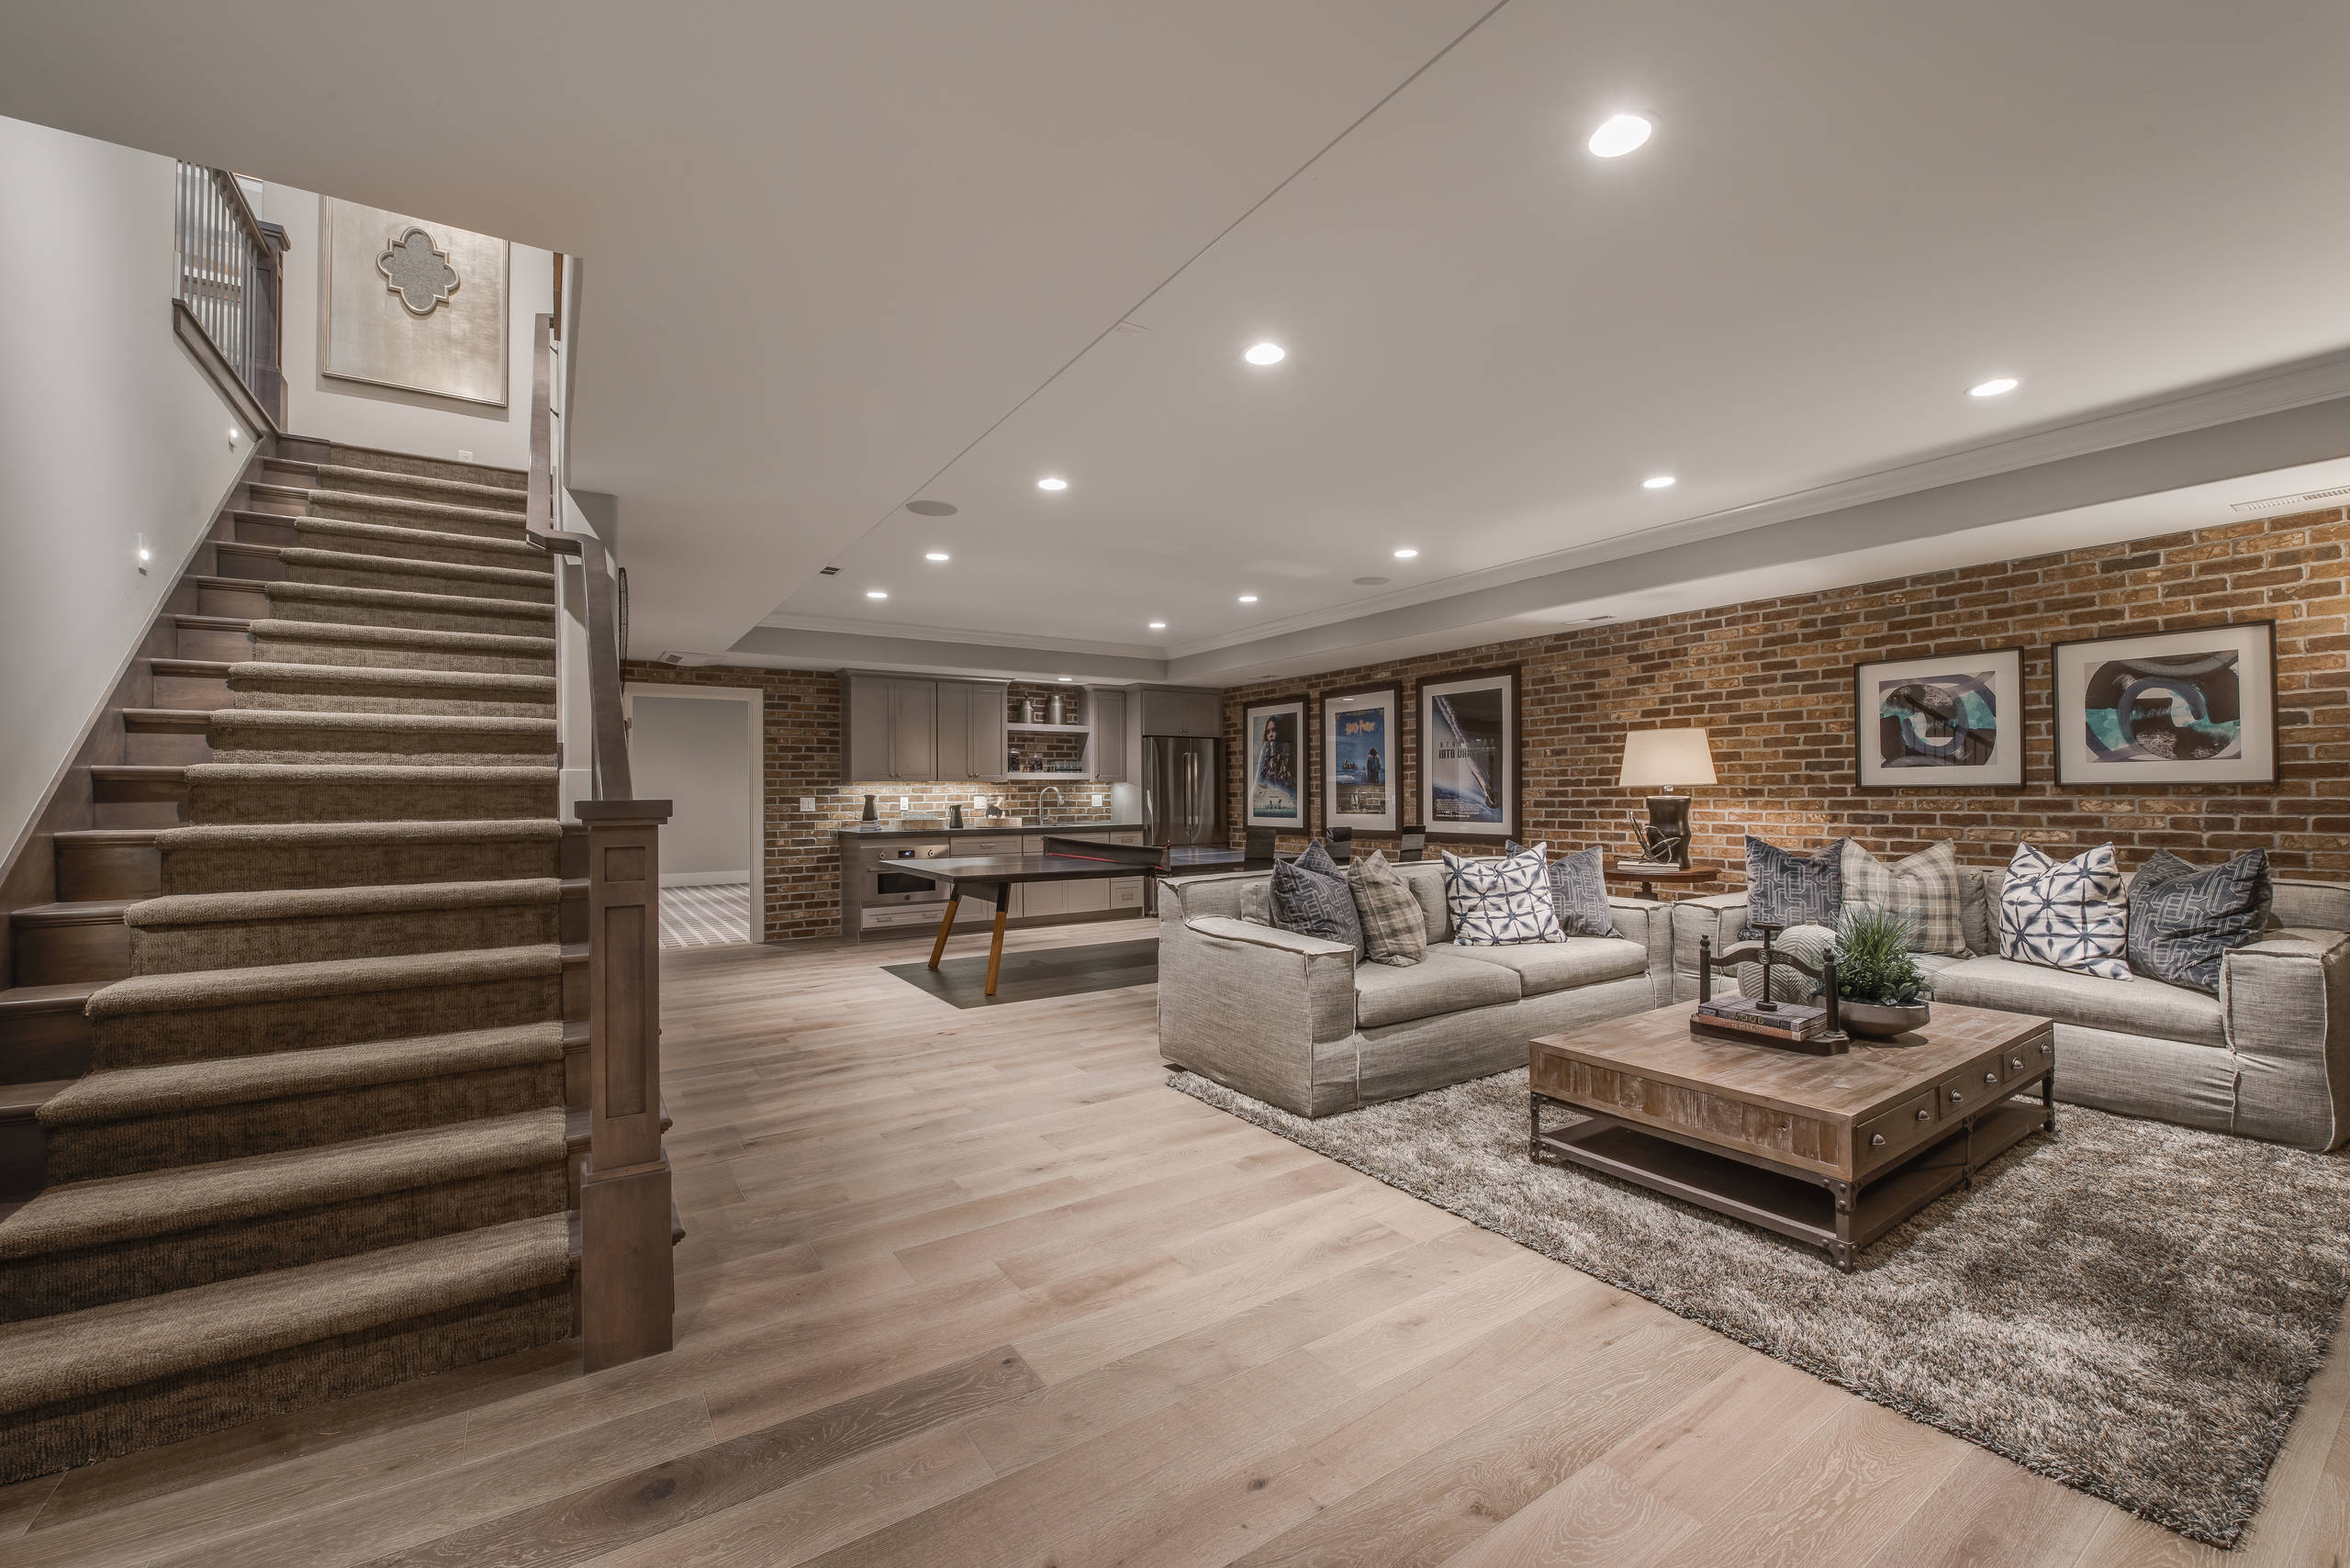 75 Beautiful Traditional Basement Pictures Ideas June